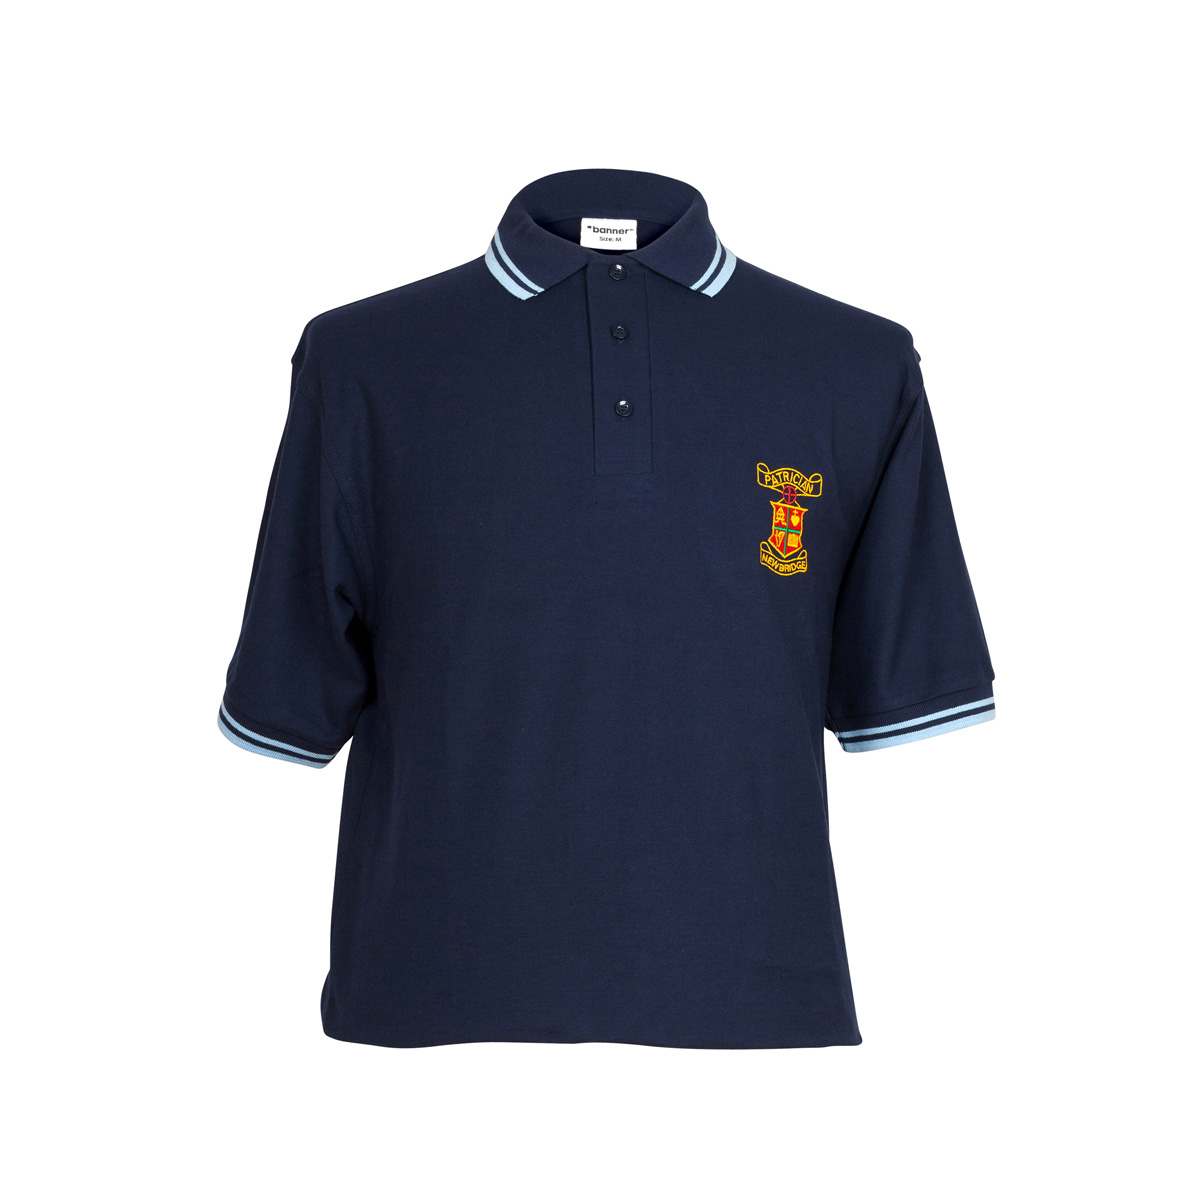 Patrician Boys School Navy Crested Polo - The Back to School Store